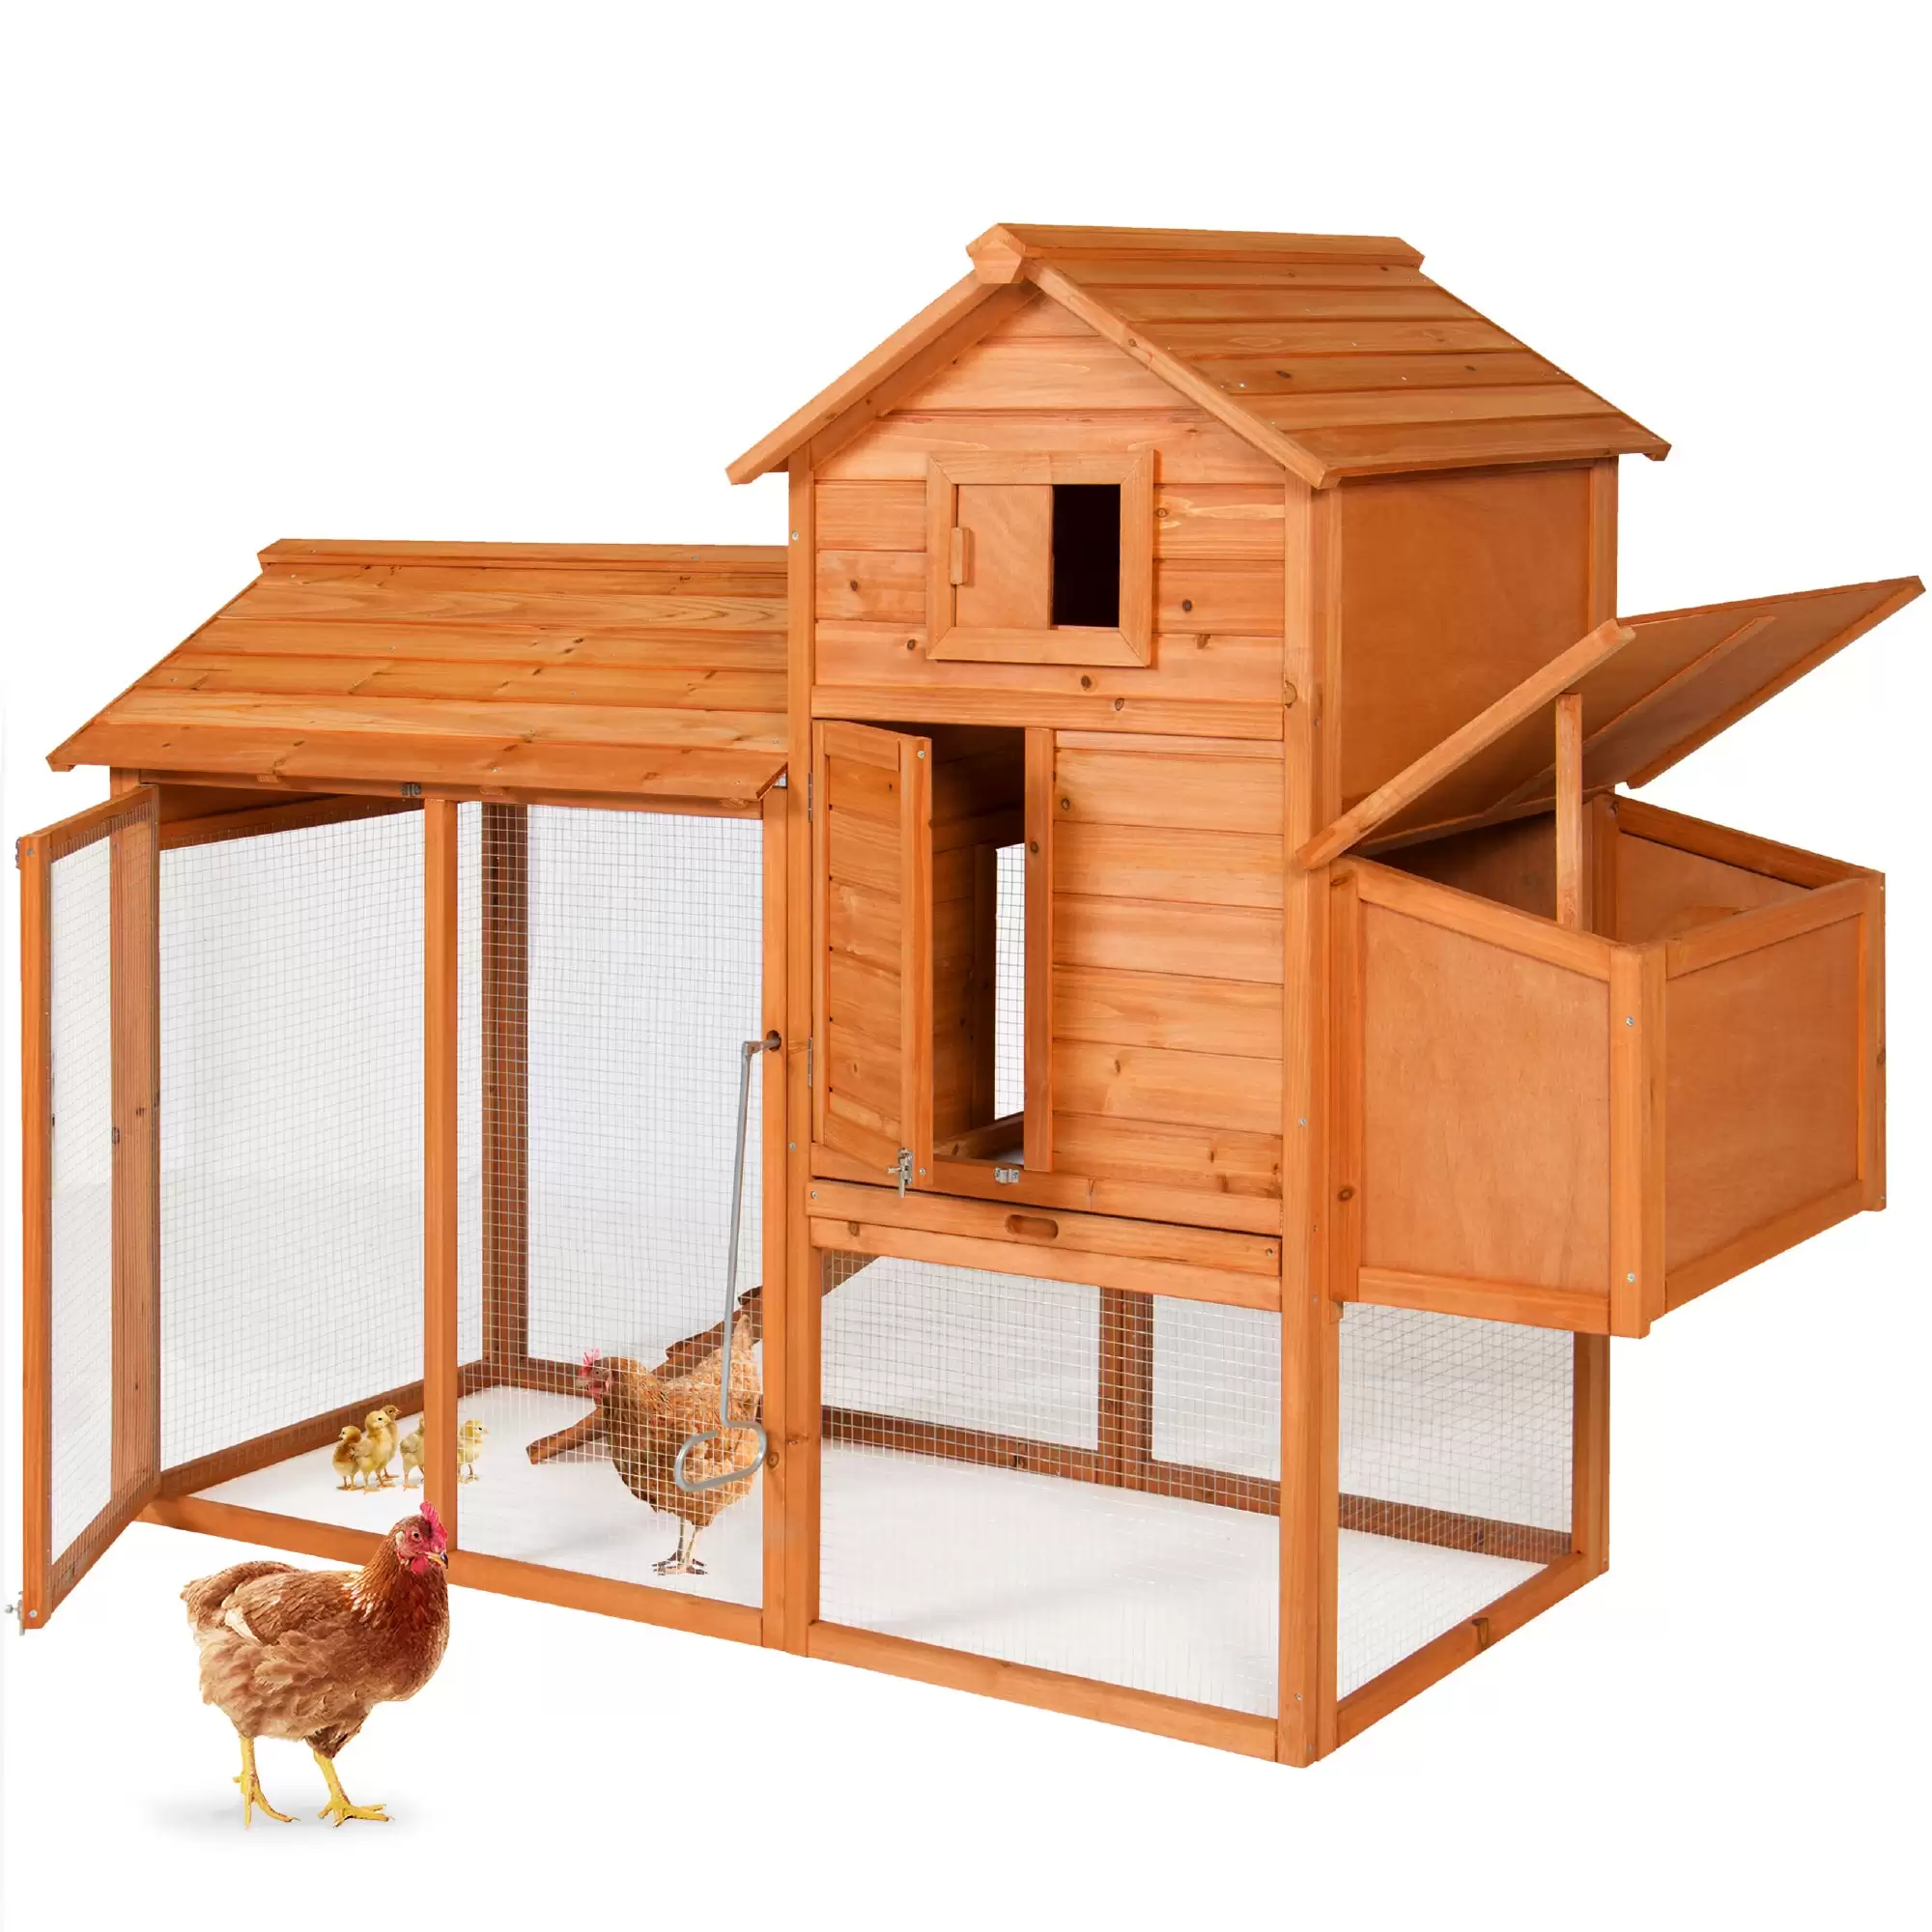 Pay $179.99 Multi-Level Wooden Chicken Coop - 80in With This Bestchoiceproducts Discount Voucher